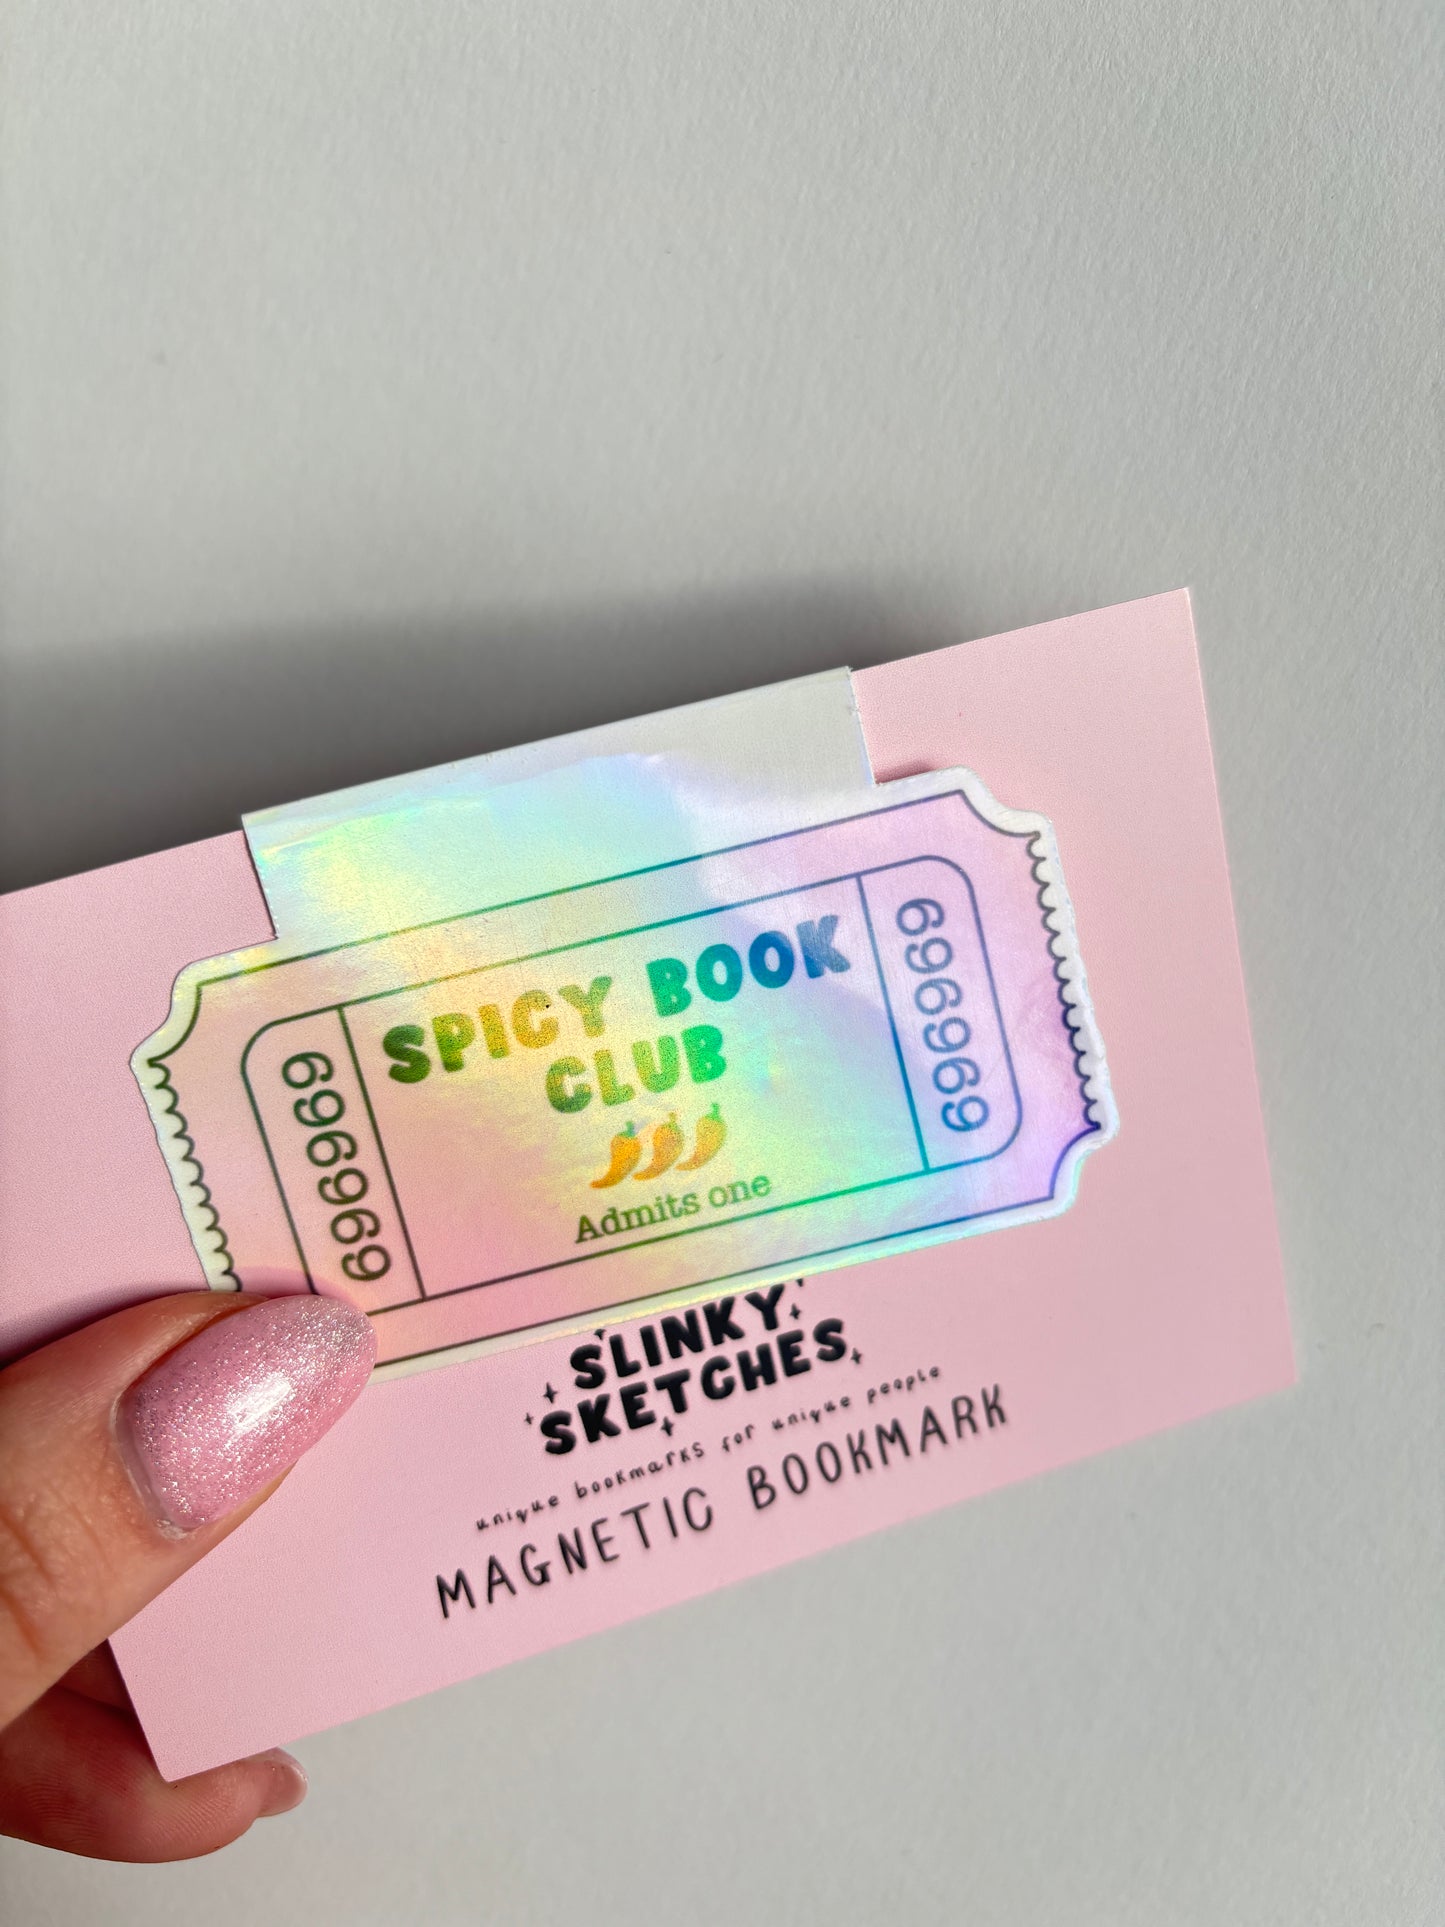 Spicy Book Club Magnetic Bookmark - HOLOGRAPHIC